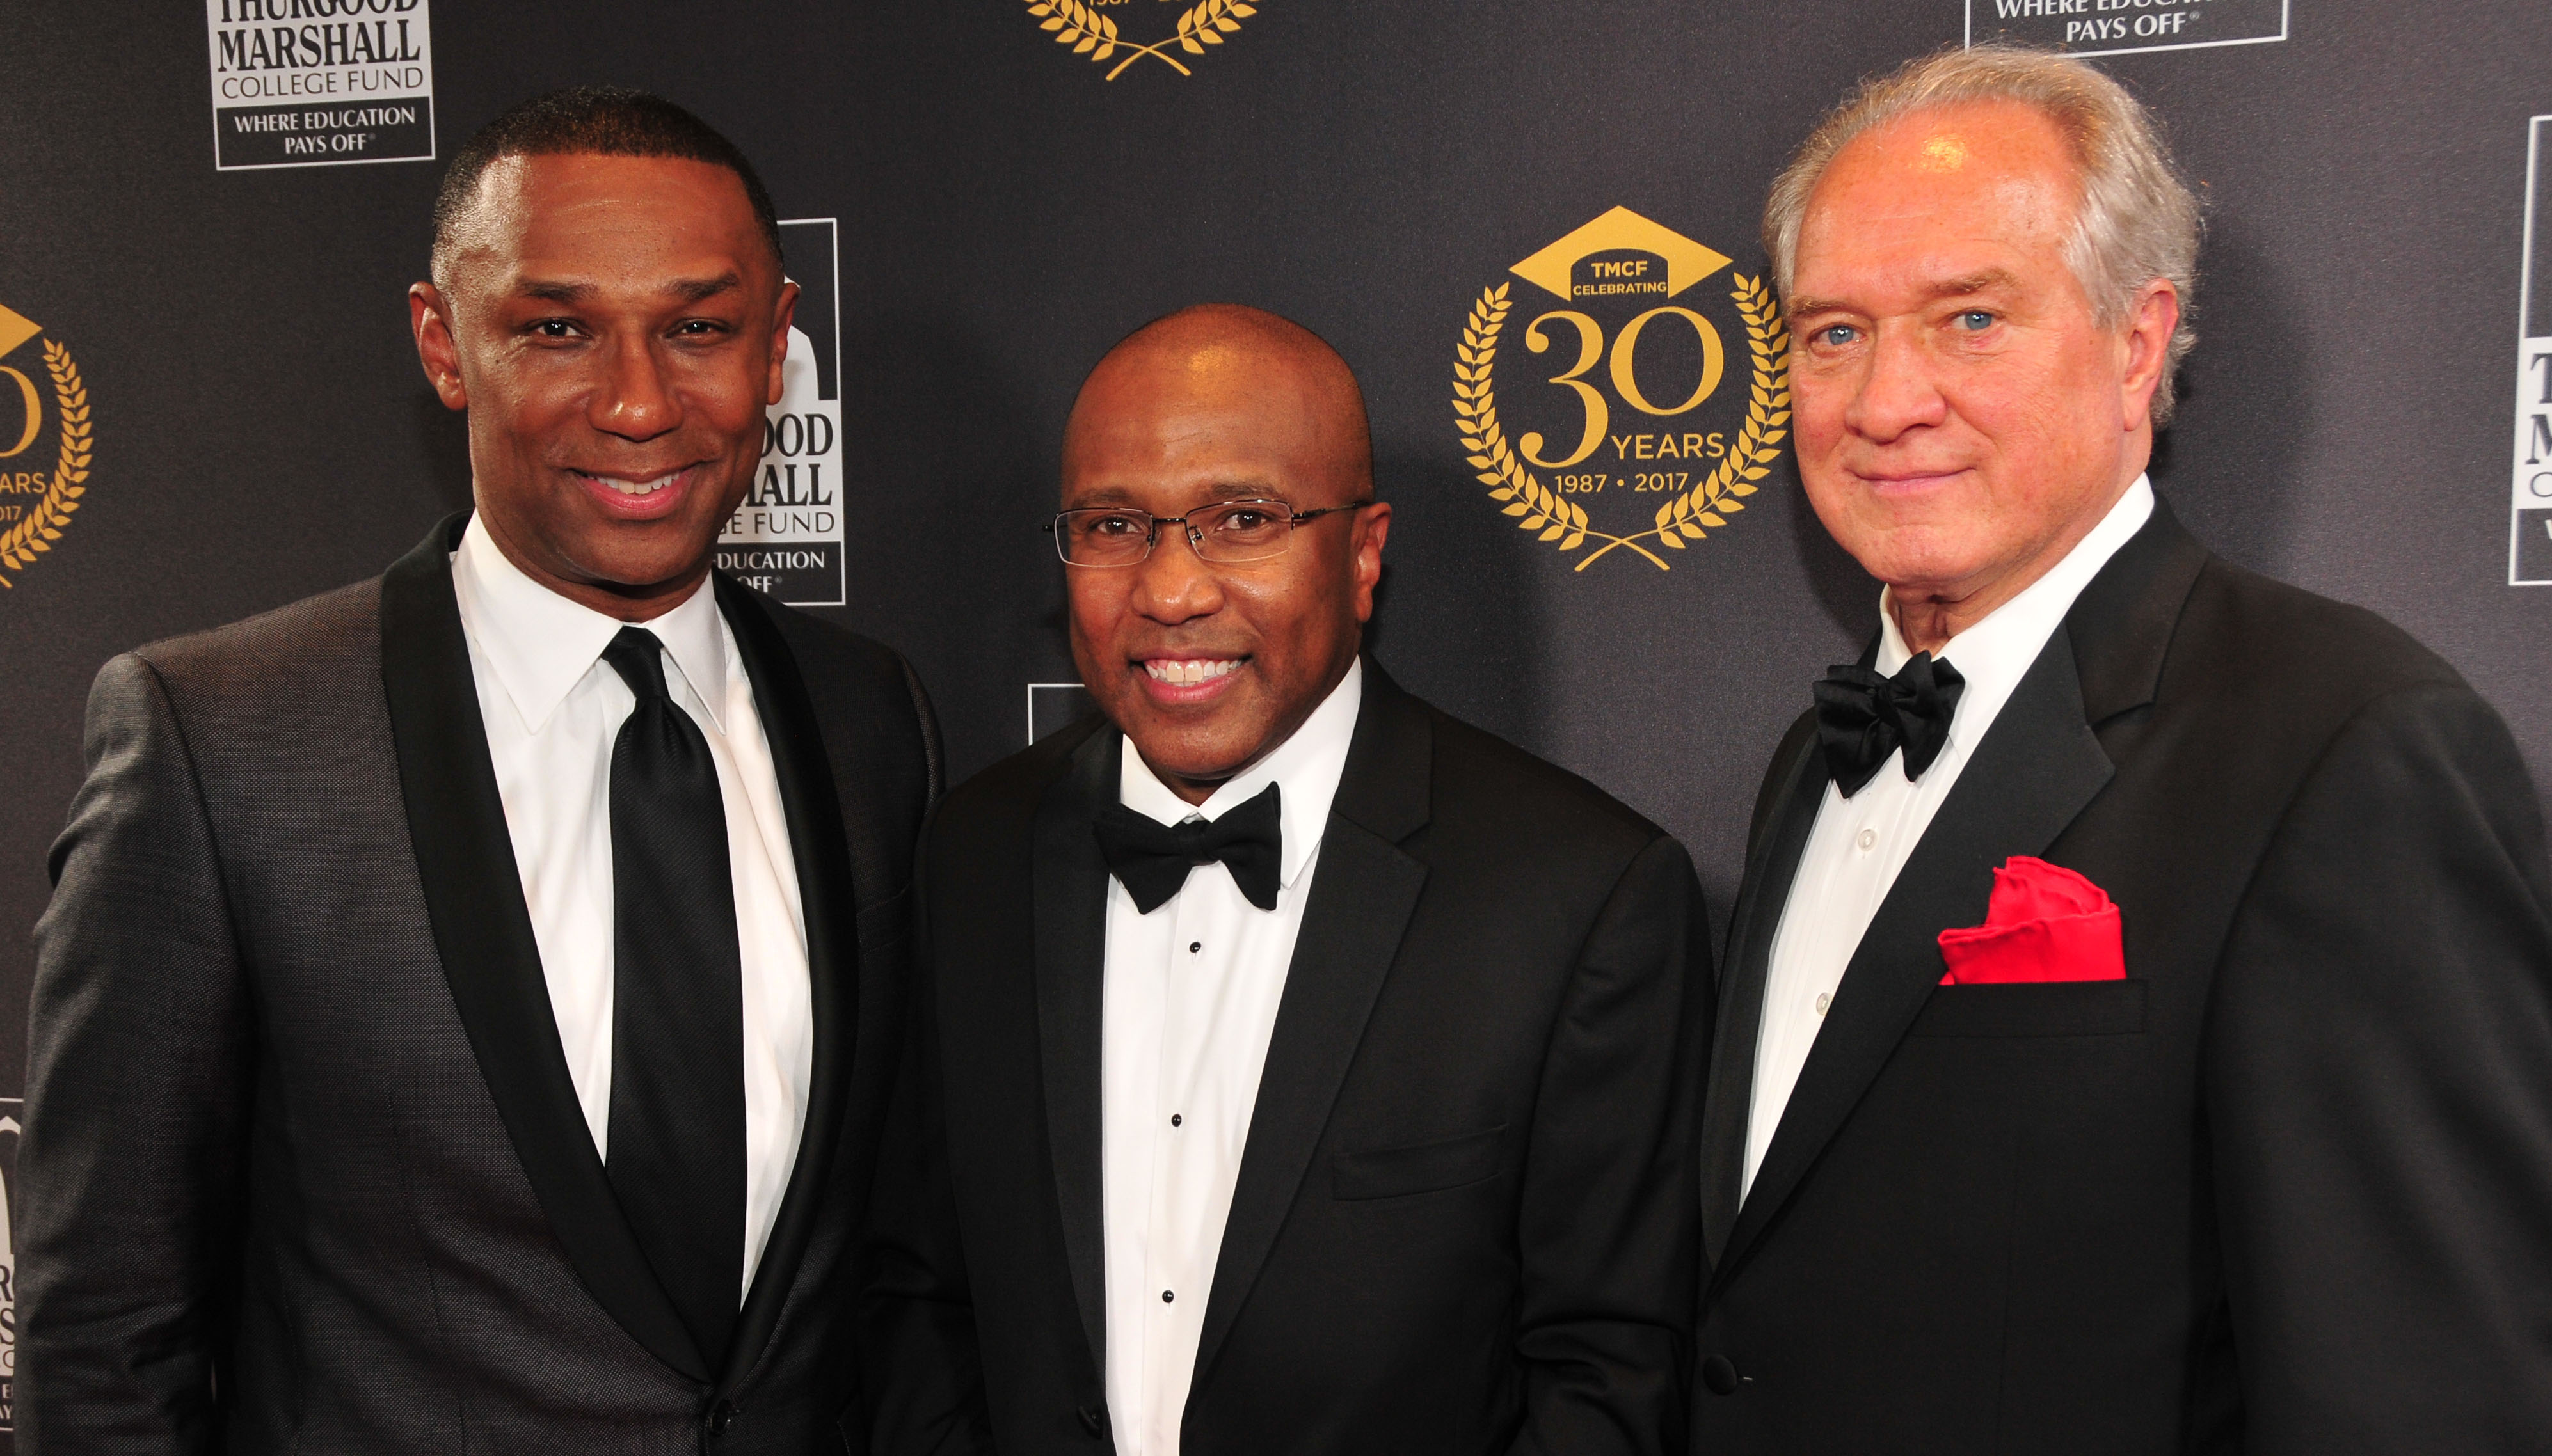 (L-r) Dr. Johnny C. Taylor Jr., outgoing TMCF CEO/president; Dr. Harry L. Williams, outgoing DSU president and newly elected TMCF CEO/president; and Jim Clifton, TMCF Board of Directors chairman and Gallup CEO. The three posed together for a photo during the Oct. 23 Thurgood Marshall Awards Gala, where Dr. Williams' new career chapter was announced.